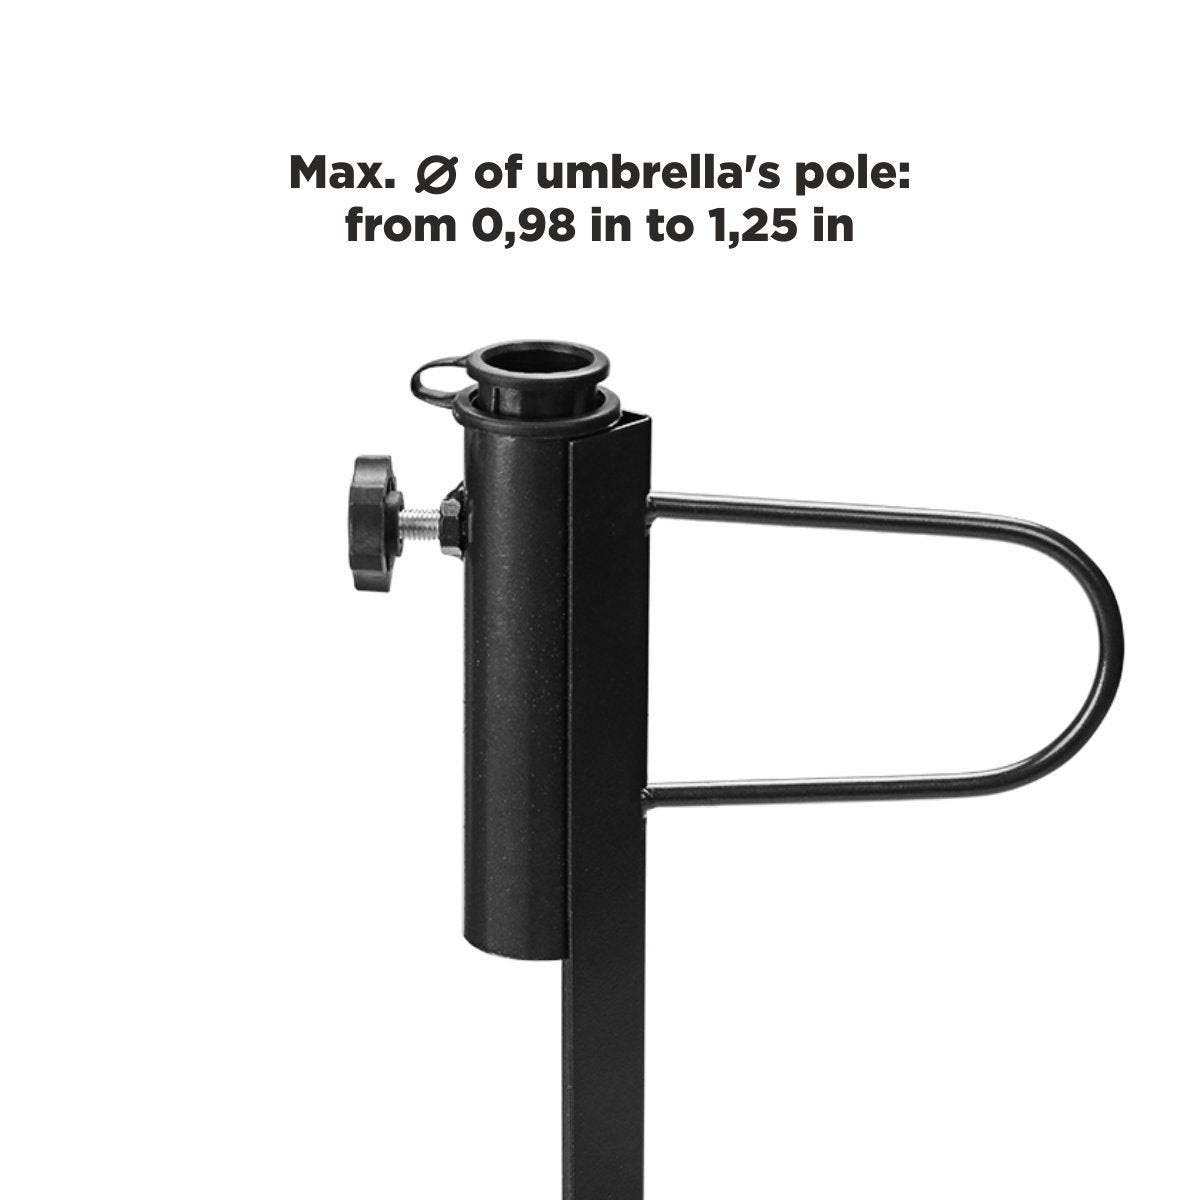 Max umbrella pole diameter the Heavy Duty Steel Beach Umbrella Sand Anchor holds varies from 0.98 inches up to 1.25 inches